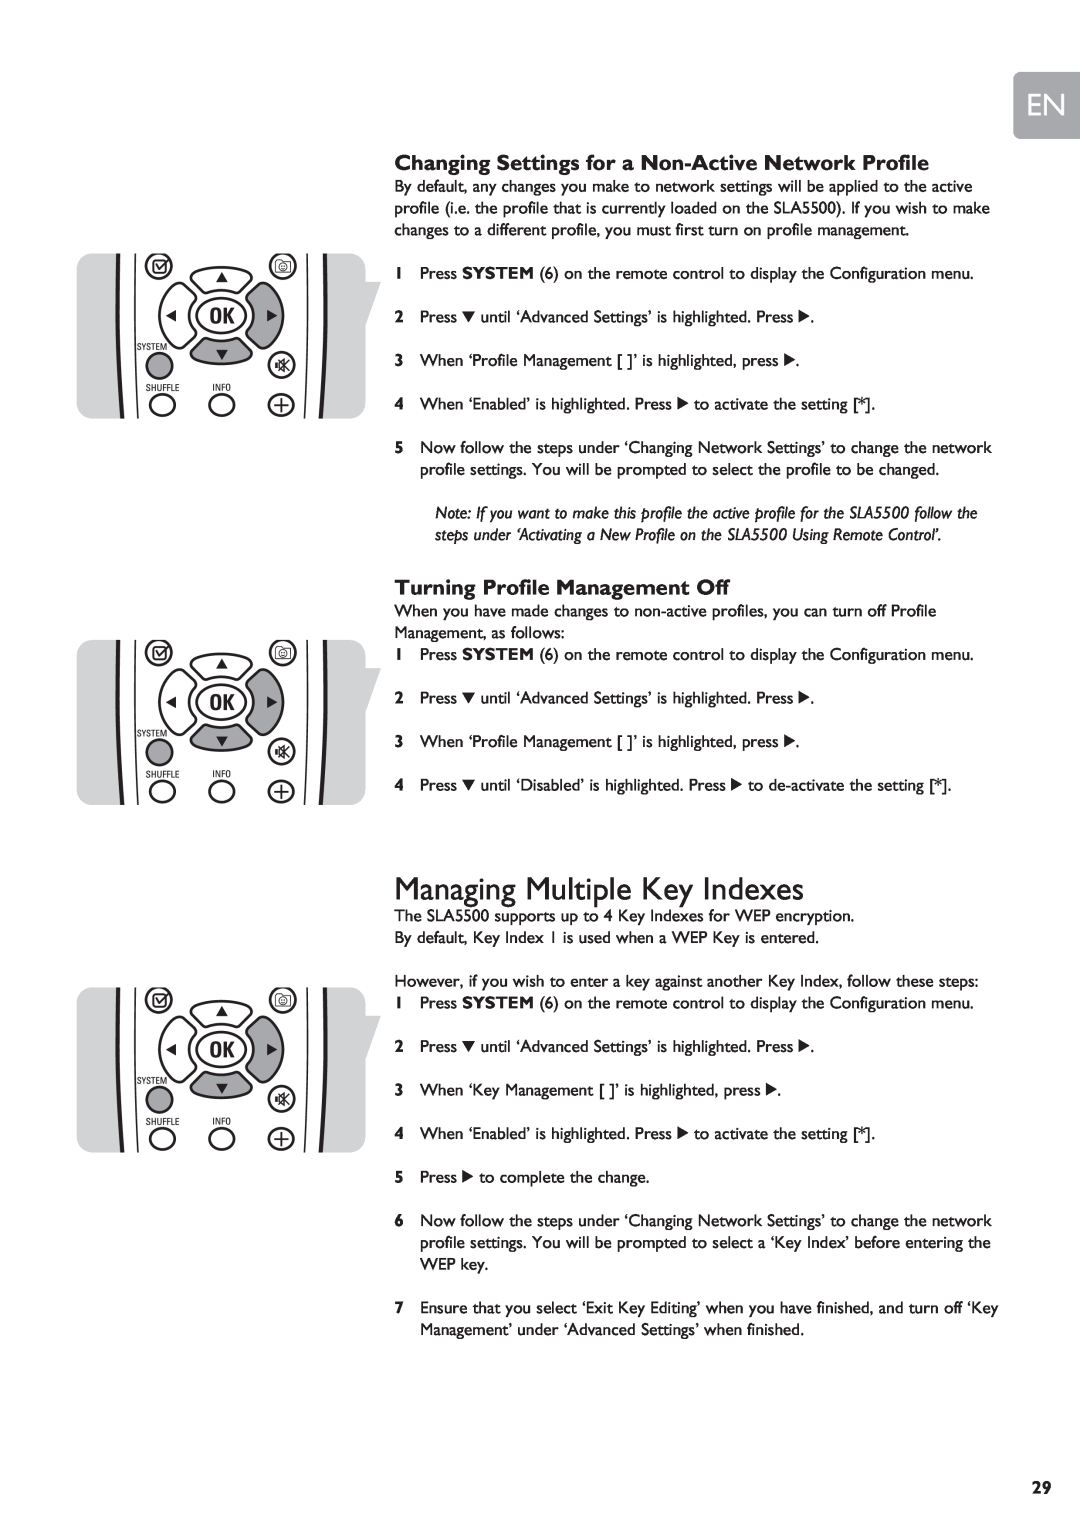 Philips SLA5500 user manual Managing Multiple Key Indexes, Changing Settings for a Non-ActiveNetwork Profile 